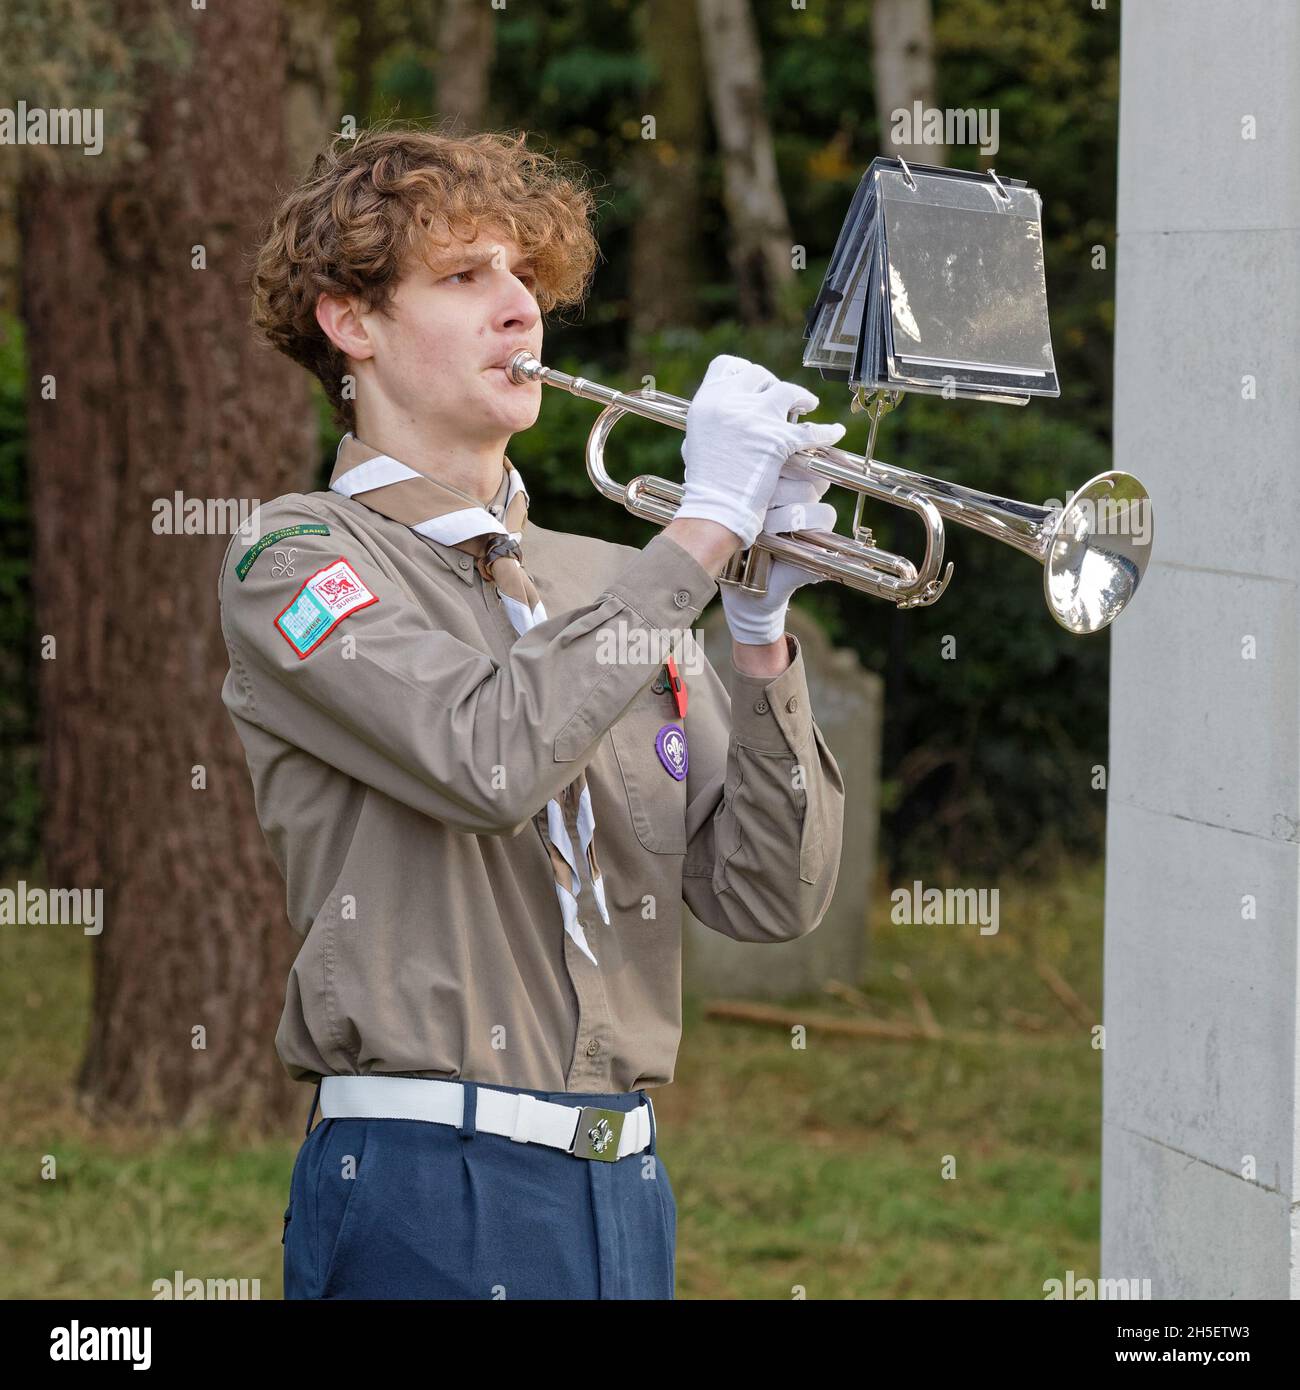 Sunday 7th November 2021. Trumpeter of the Scout Band sounds the last post and later reveille. Brookwood Last Post Association hold their monthly service with hundreds of scouts, guides & the 1st Claygate Scout & Guide Band. Air Forces Shelter, Brookwood Military Cemetery, Surrey. Stock Photo